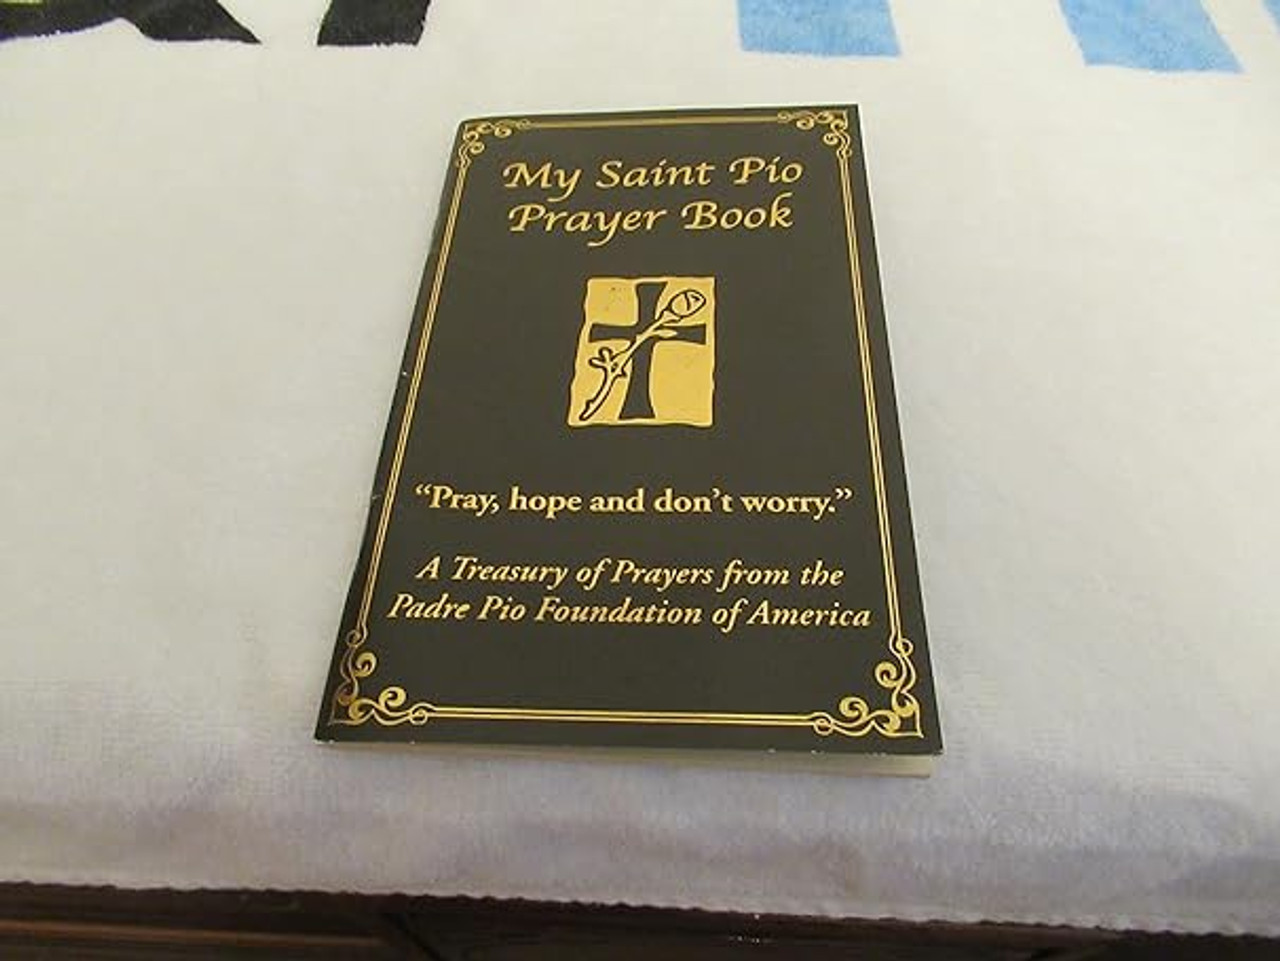 This prayer book provides a collection of prayers to and by Saint Pio, as well as all the basic Catholic prayers to Our Lord, Our Lady, and favorite saints. Includes an Index of Prayers, brief biography, and prayers for various needs.

Used in like new condition.